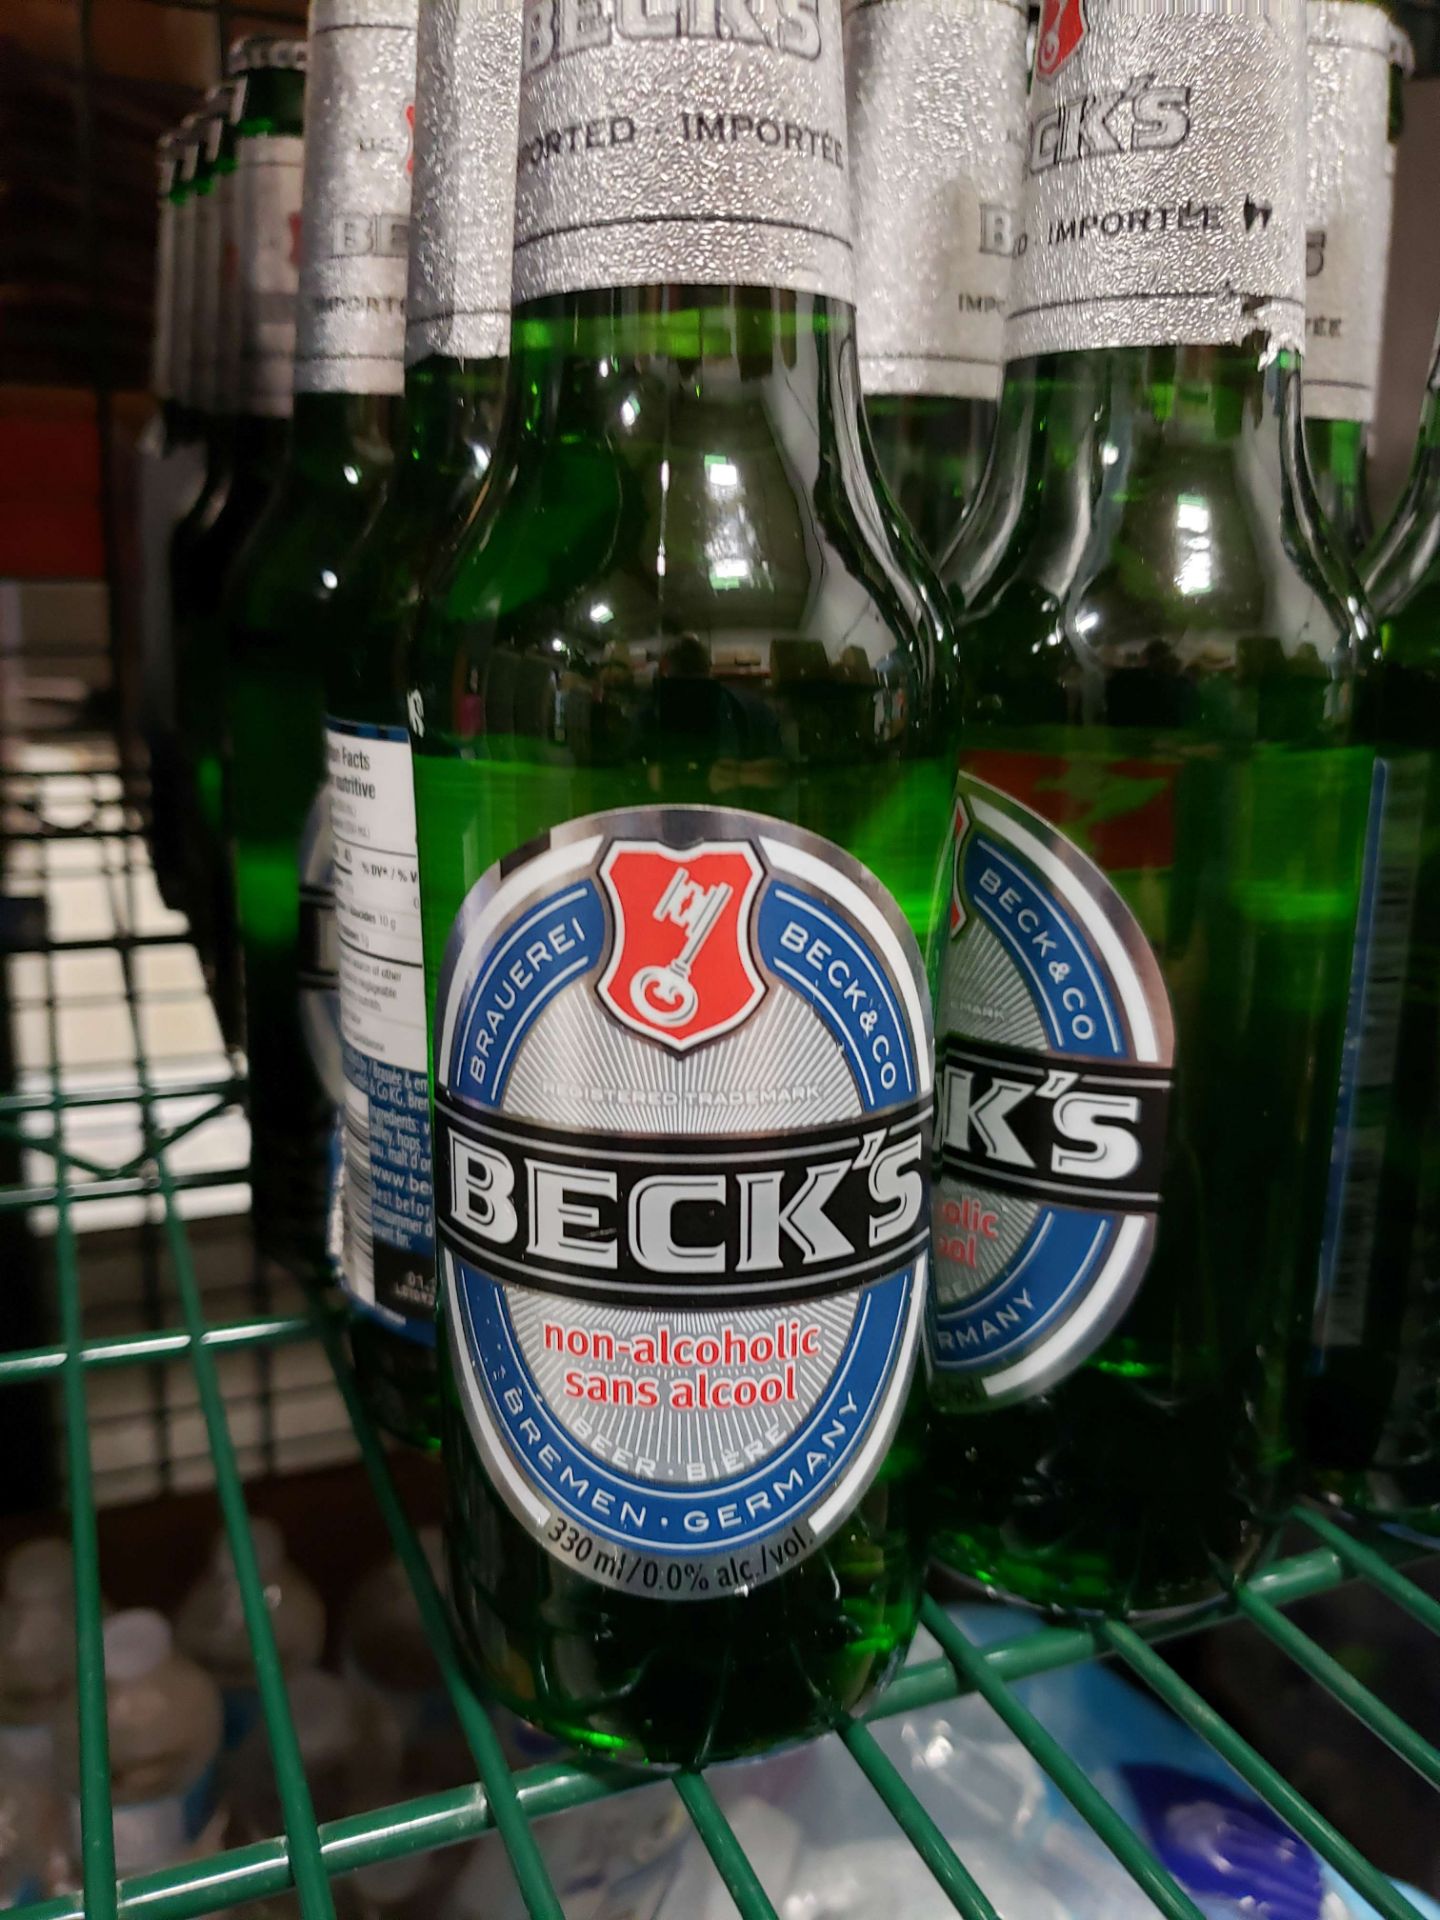 Beck's Non-Alcoholic Beer - Lot of 36 x 330 ml Bottles